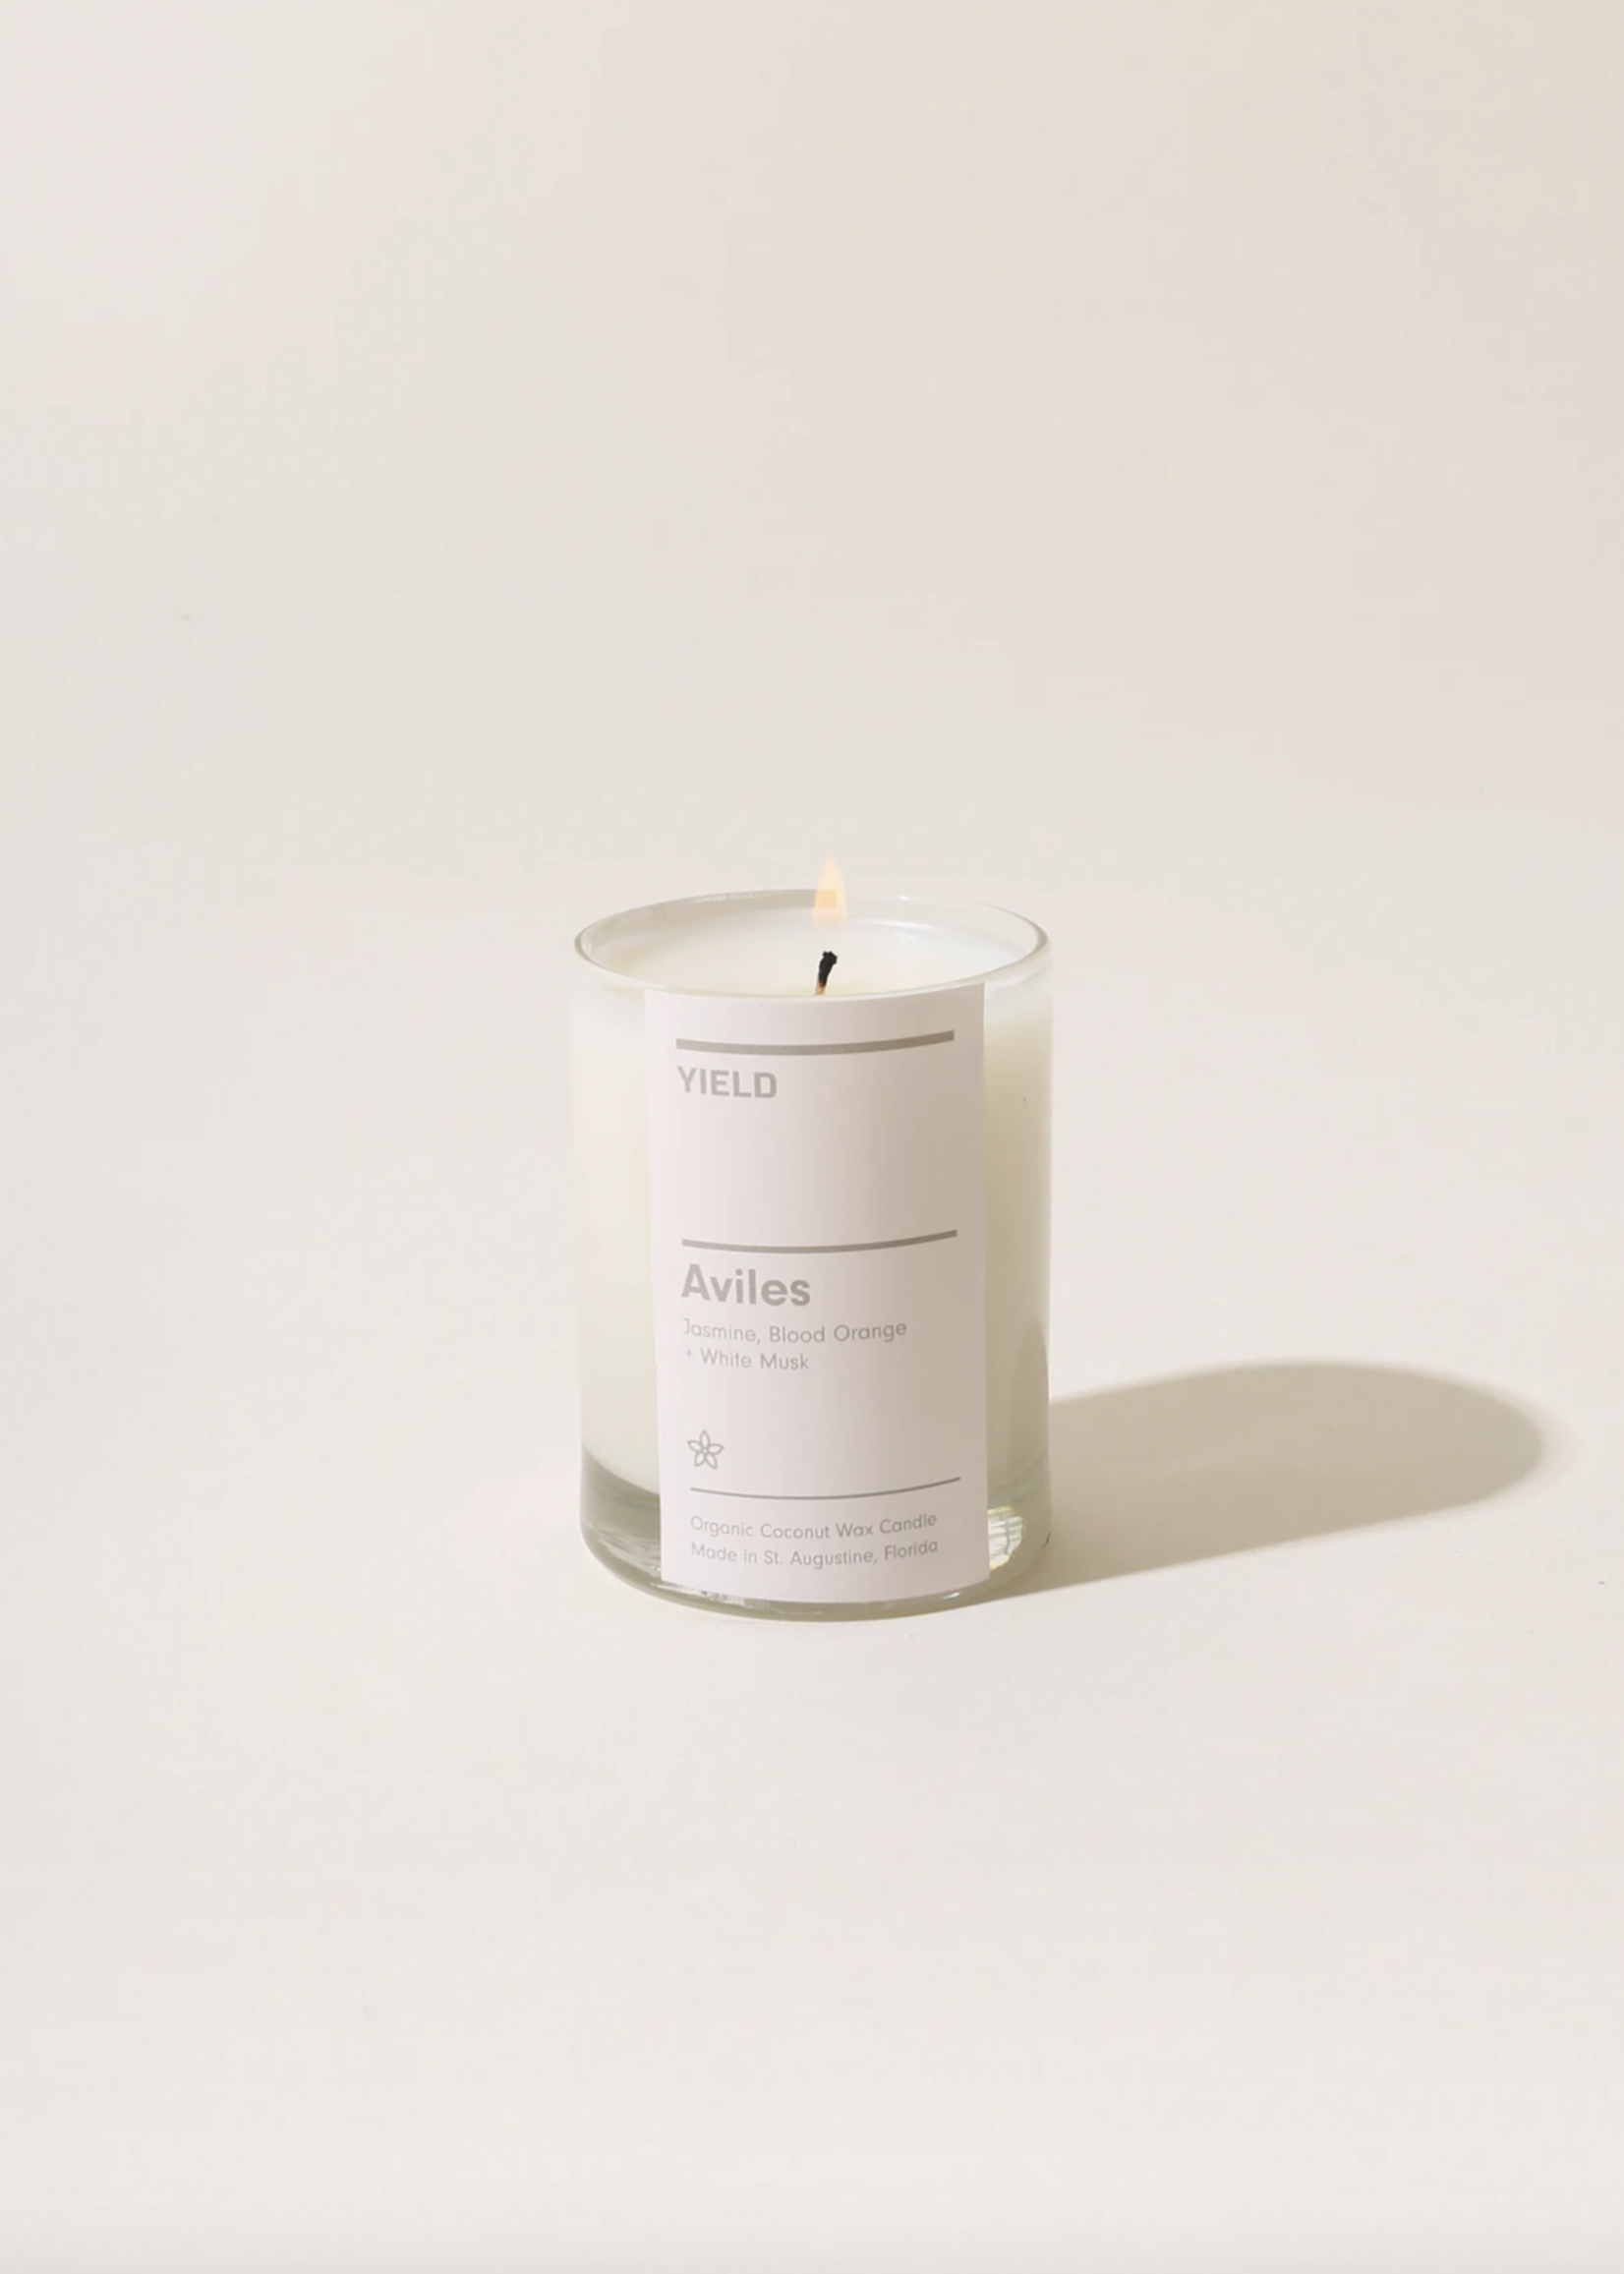 Yield Design 2.5oz Votives by Yield